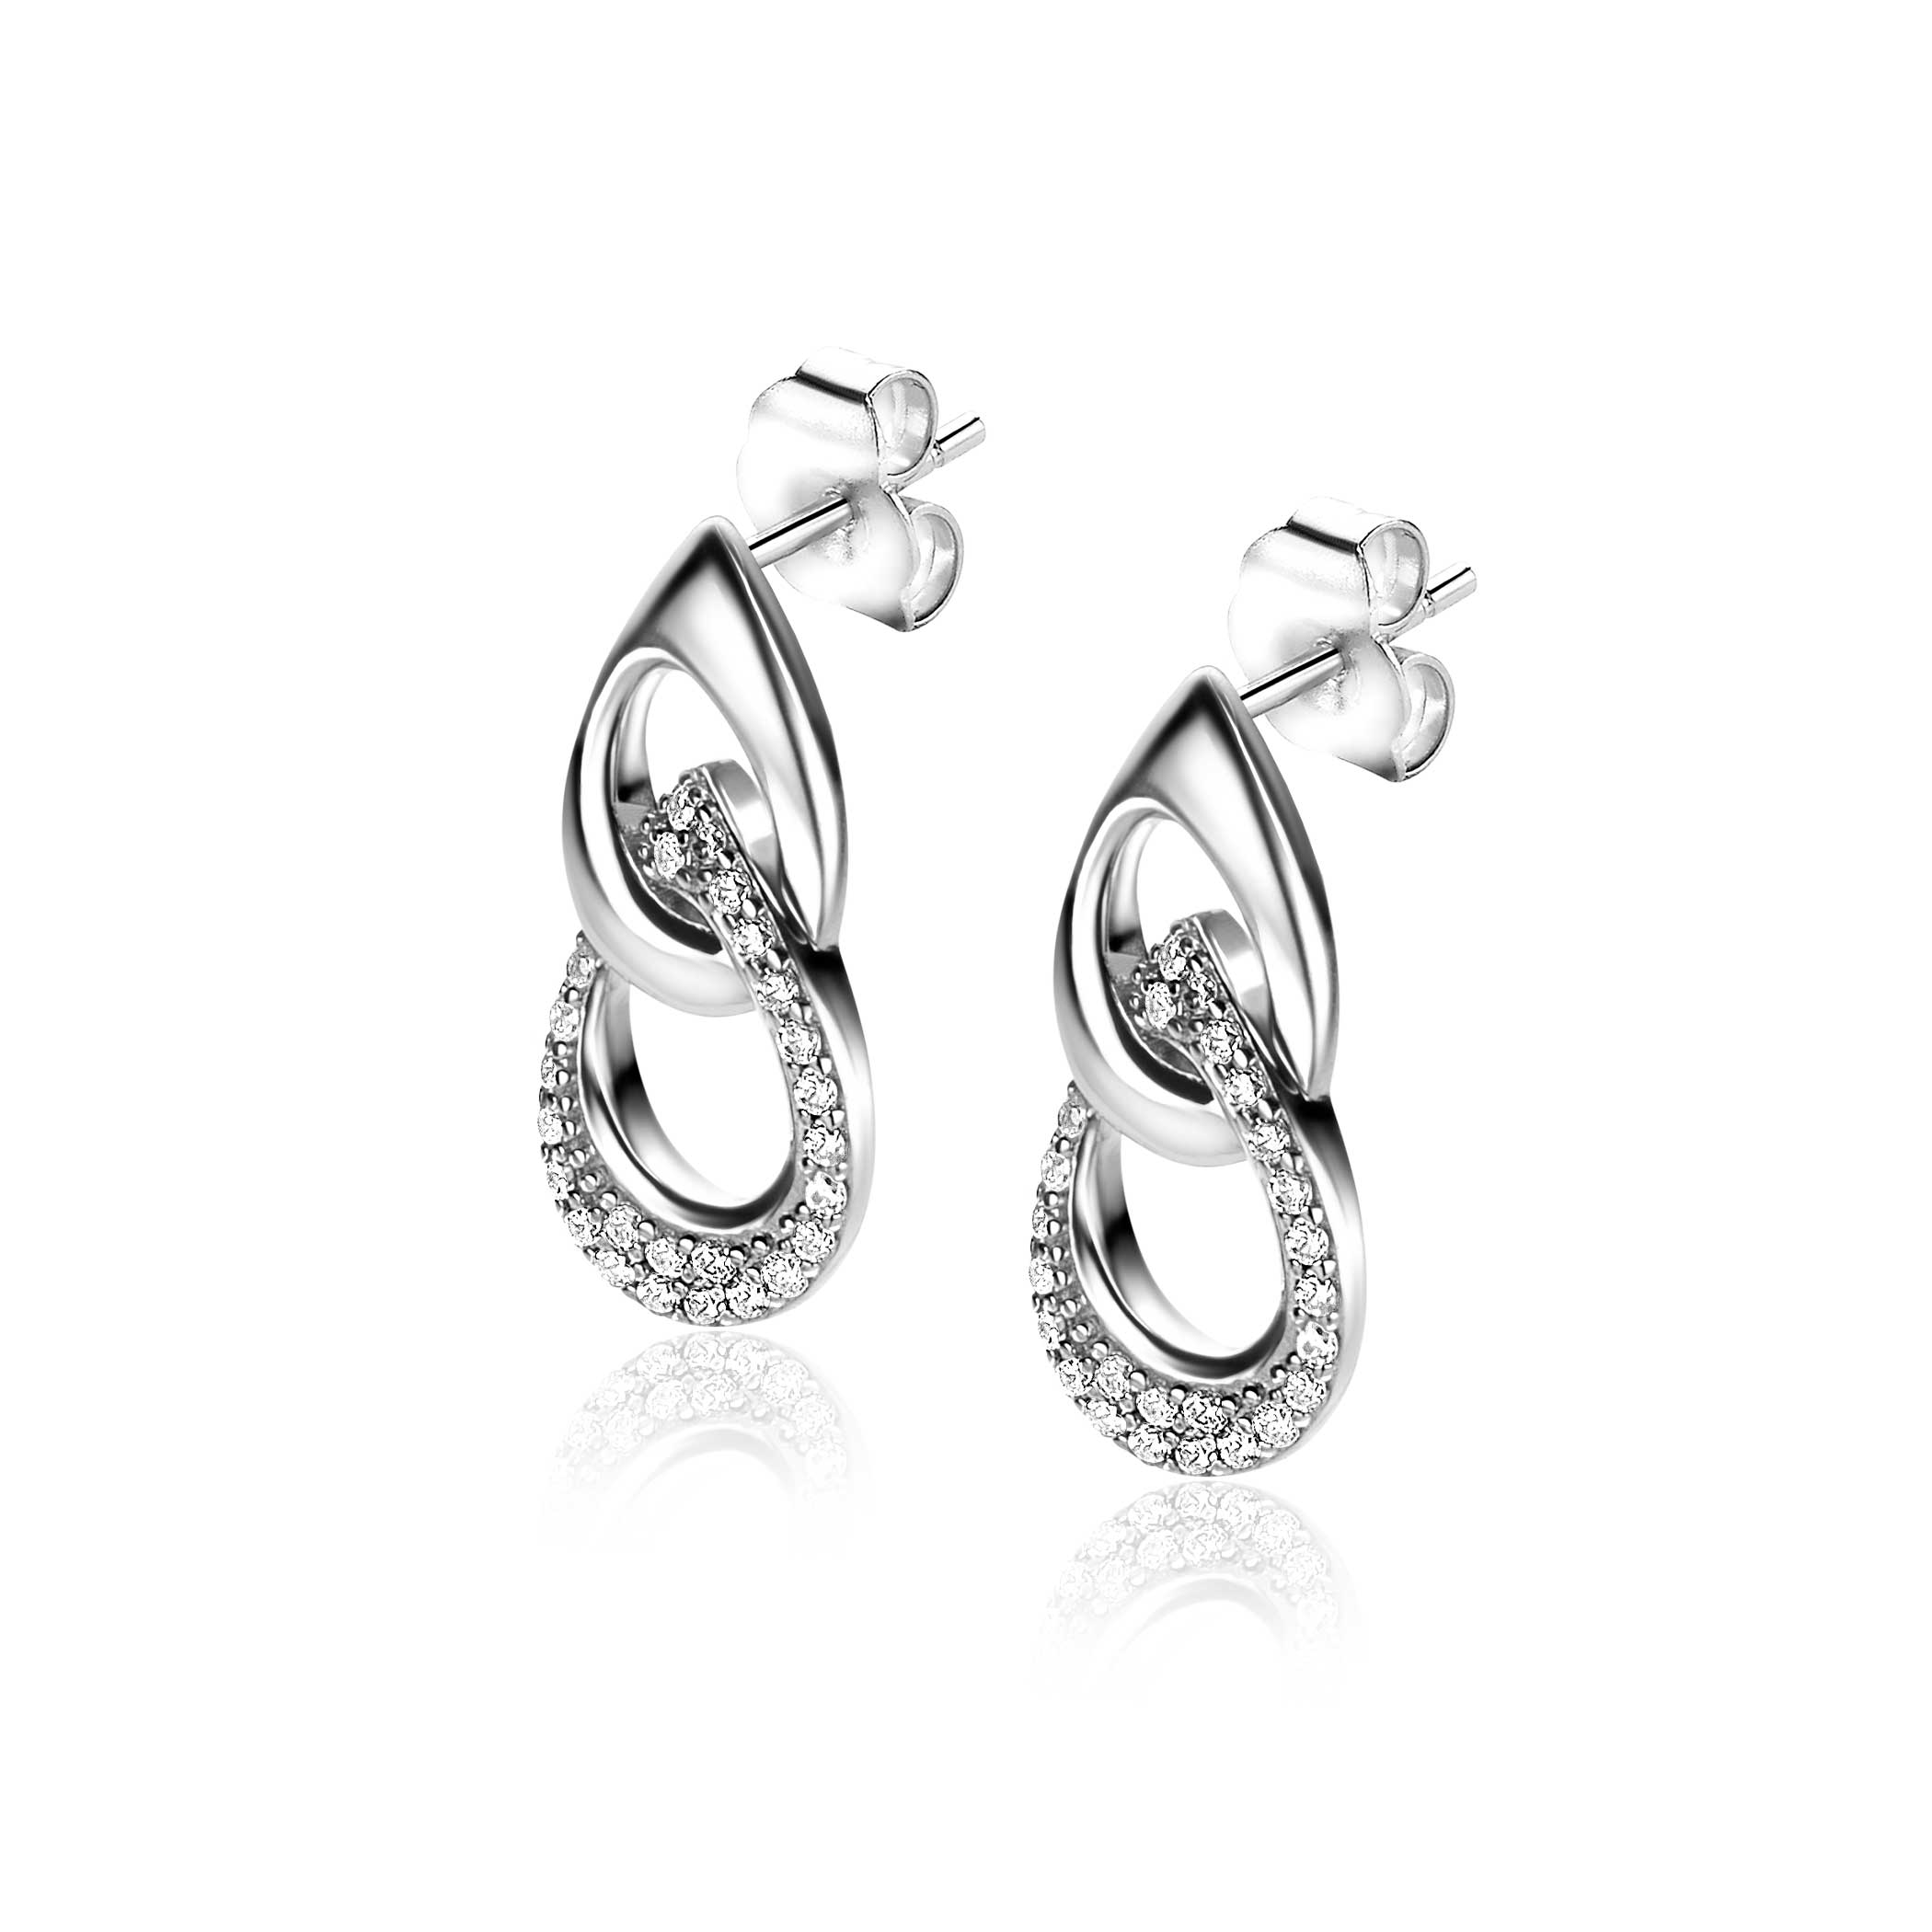 20mm ZINZI silver ear studs with two open pear-shaped links and set with white zirconias by Dutch Designer Mart Visser MVO24